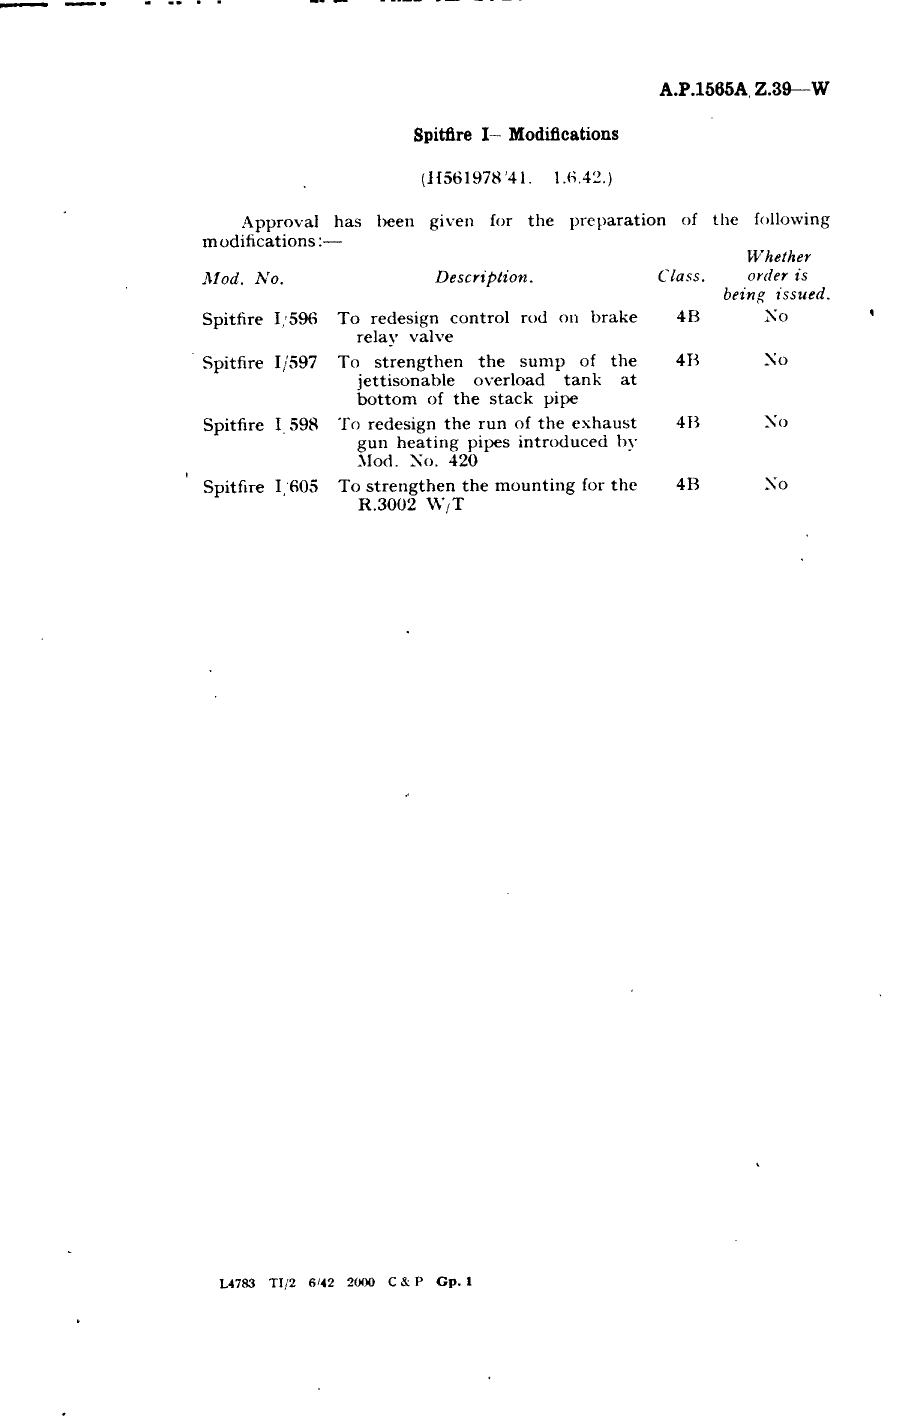 Sample page 1 from AirCorps Library document: Spitfire I Modifications 596, 597, 598 and 605